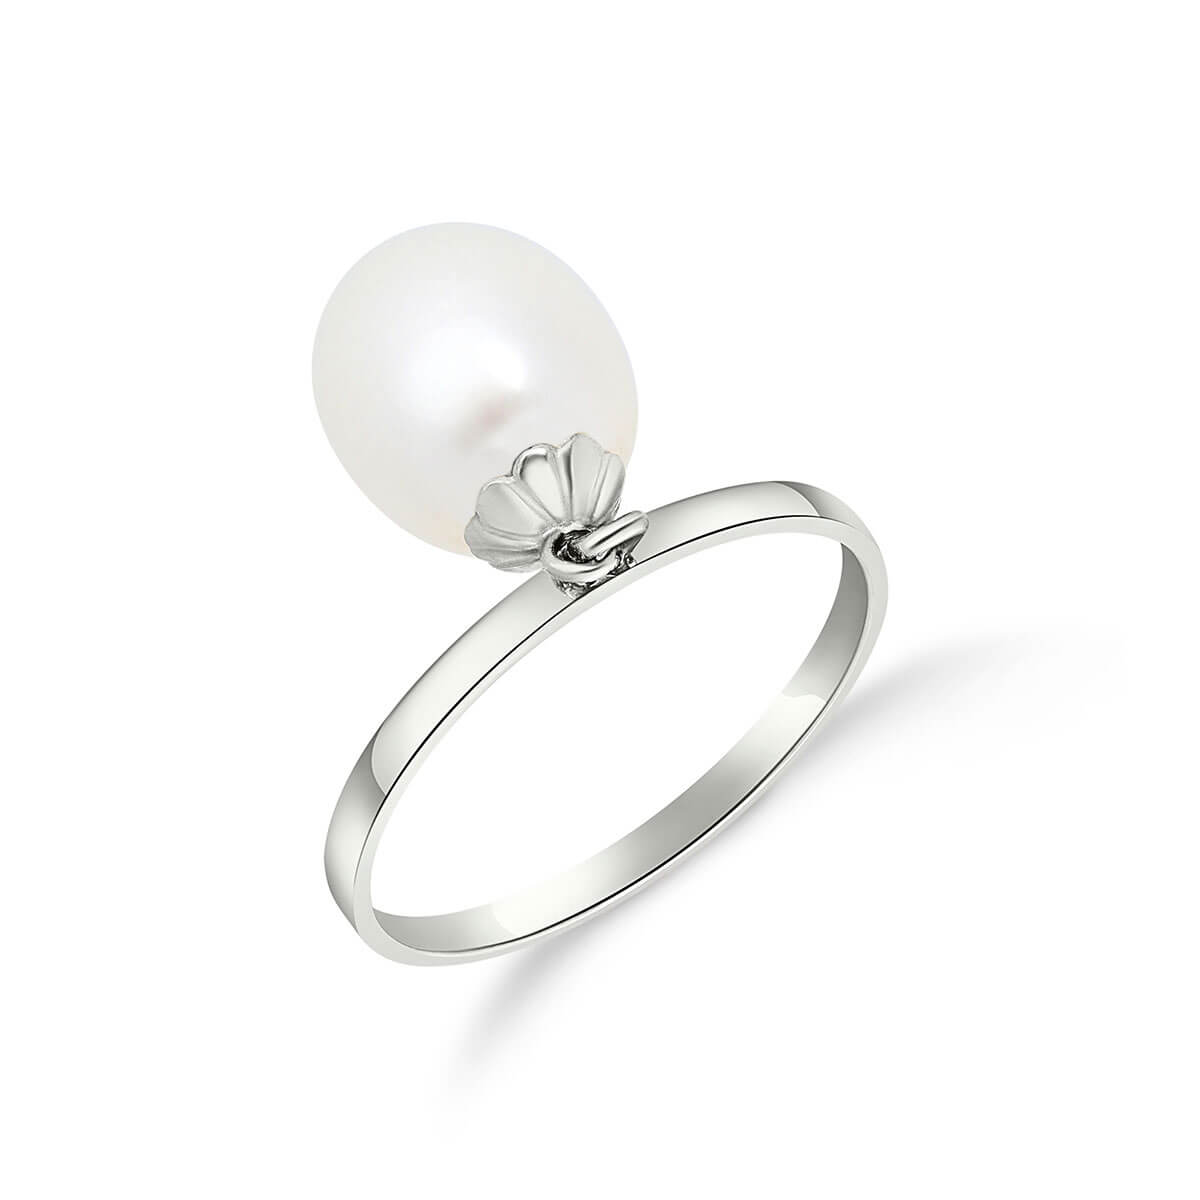 Oval Cut Pearl Ring 4 ct in Sterling Silver